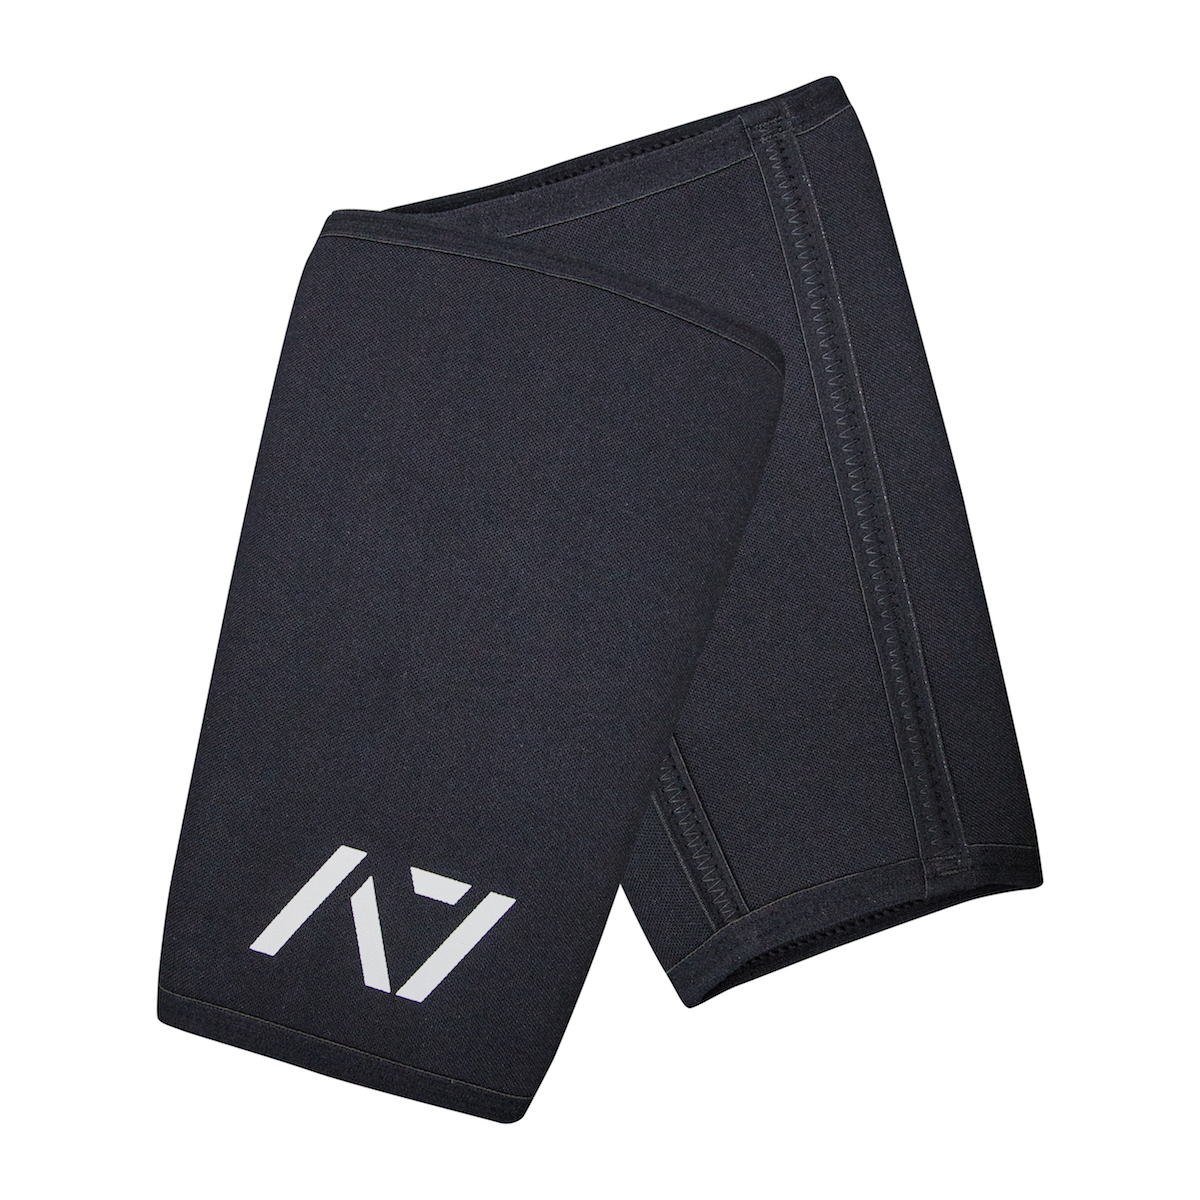 A7 IPF approved Black CONE knee sleeves are structured with a downward cut panel on the back of the quad and calf to ensure ultimate compression at the knee joint. A7 CONE knee sleeves are IPF approved for use in all powerlifting competitions. A7 CONE Knee Sleeves are IPF Approved Kit. A7 cone knee sleeves are made with high quality neoprene and the knee sleeves are sold as a pair. The double seam on the knee sleeves create a greater tension on the knee joint. A7 UK shipping to UK and Europe. 